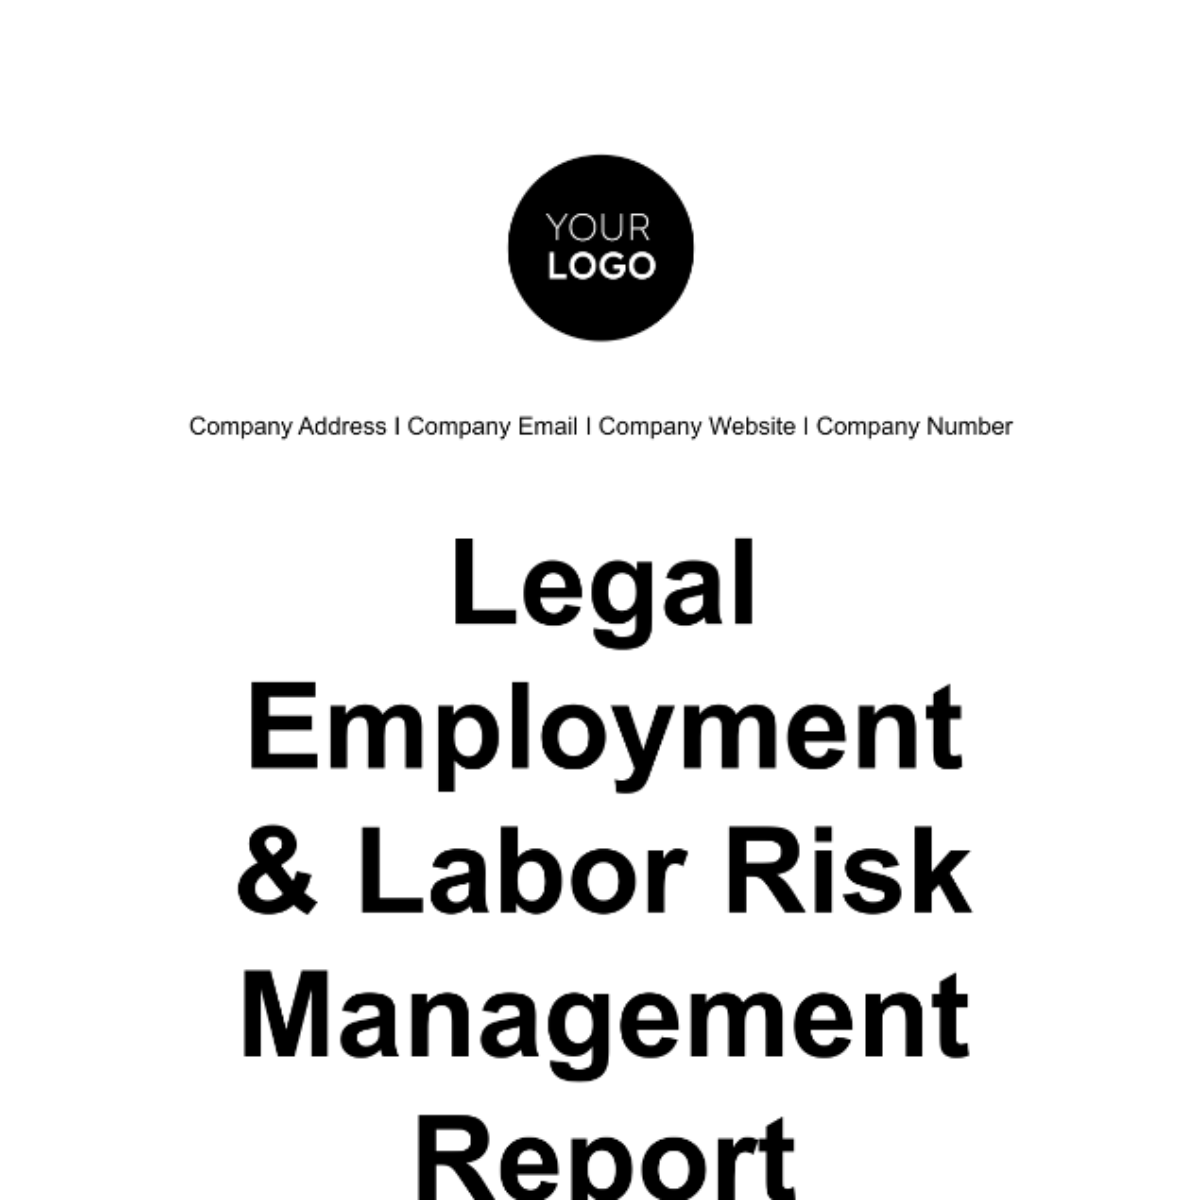 Free Legal Employment & Labor Risk Management Report Template